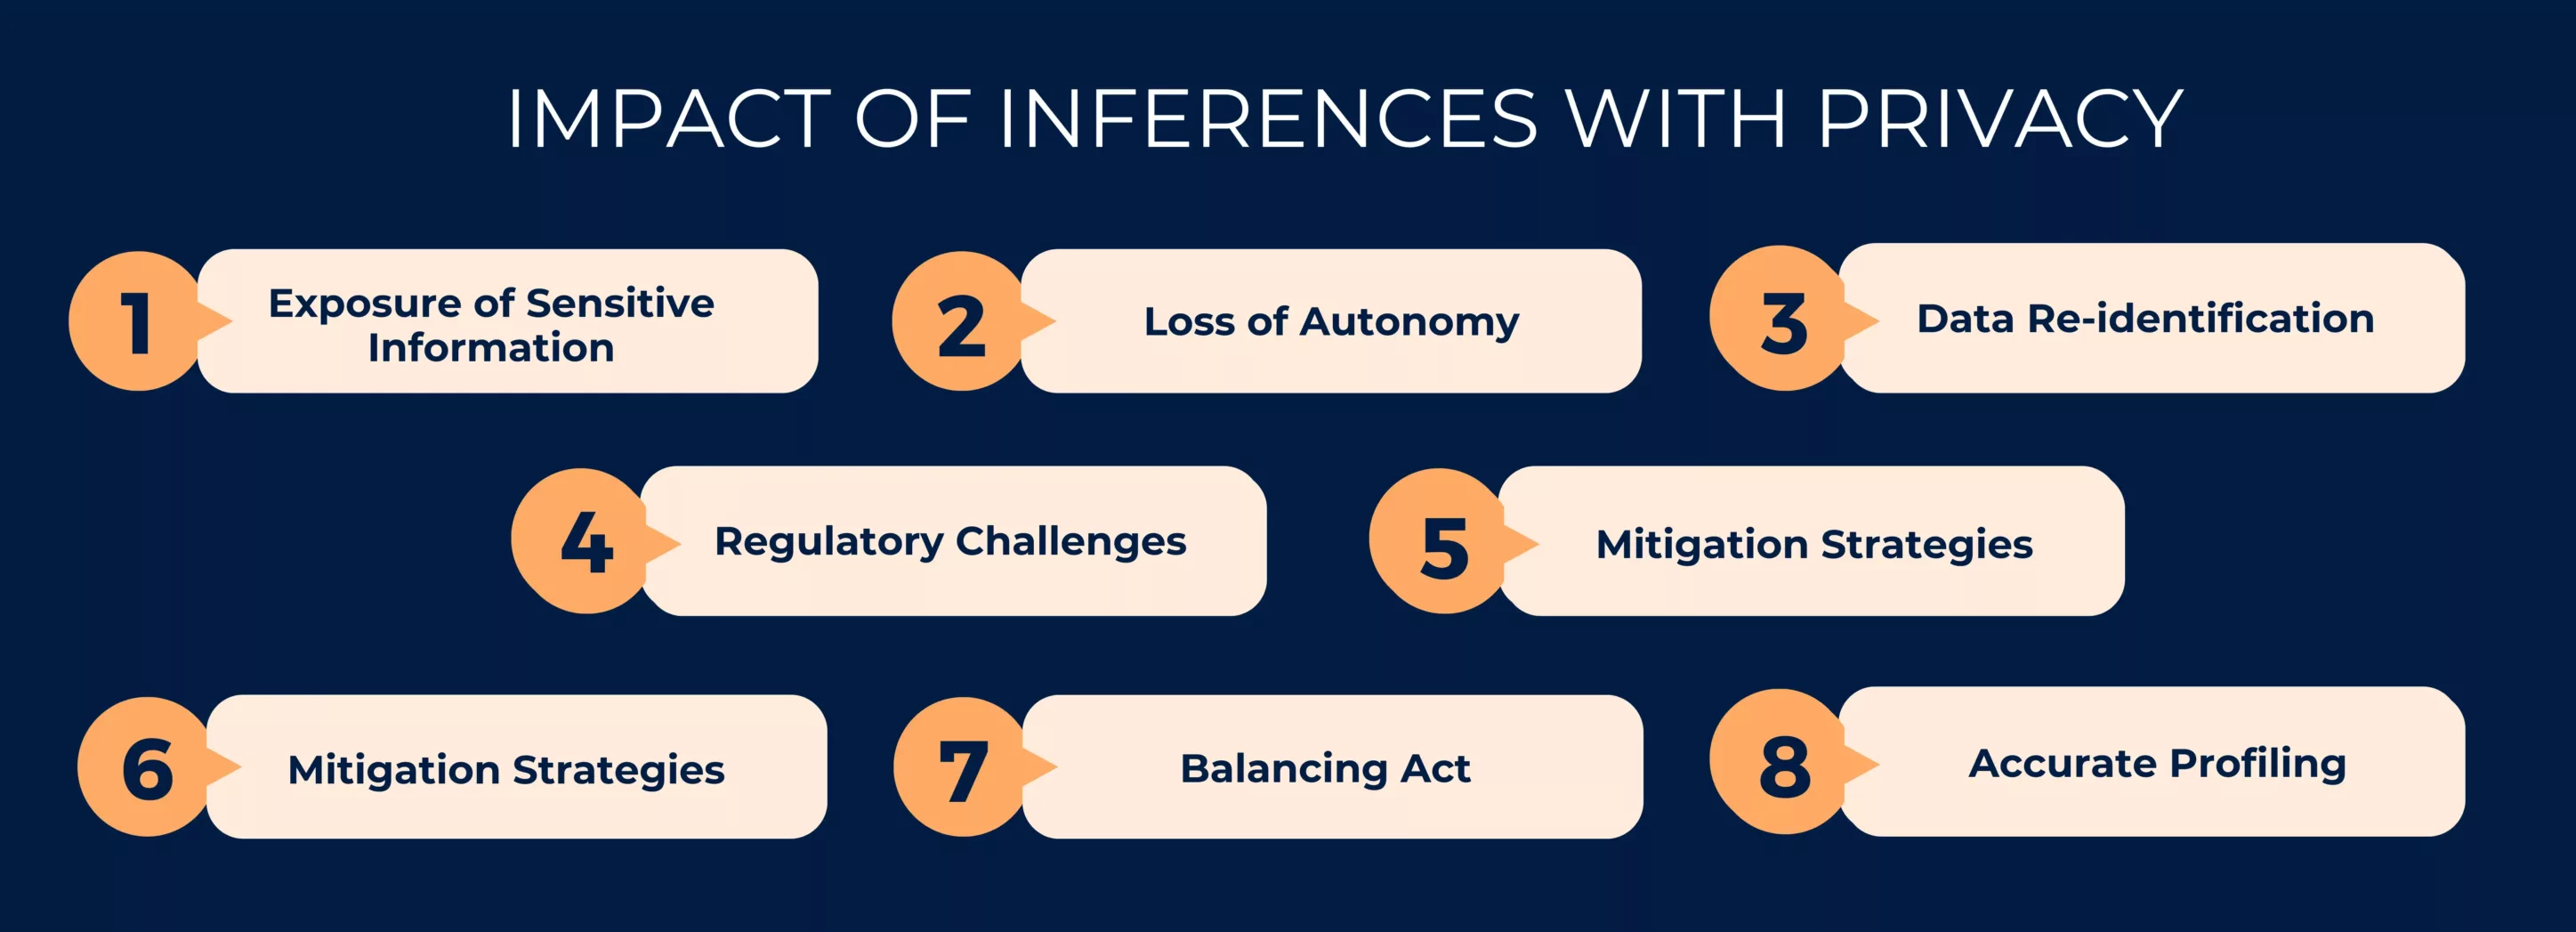 Impact of inferences with privacy